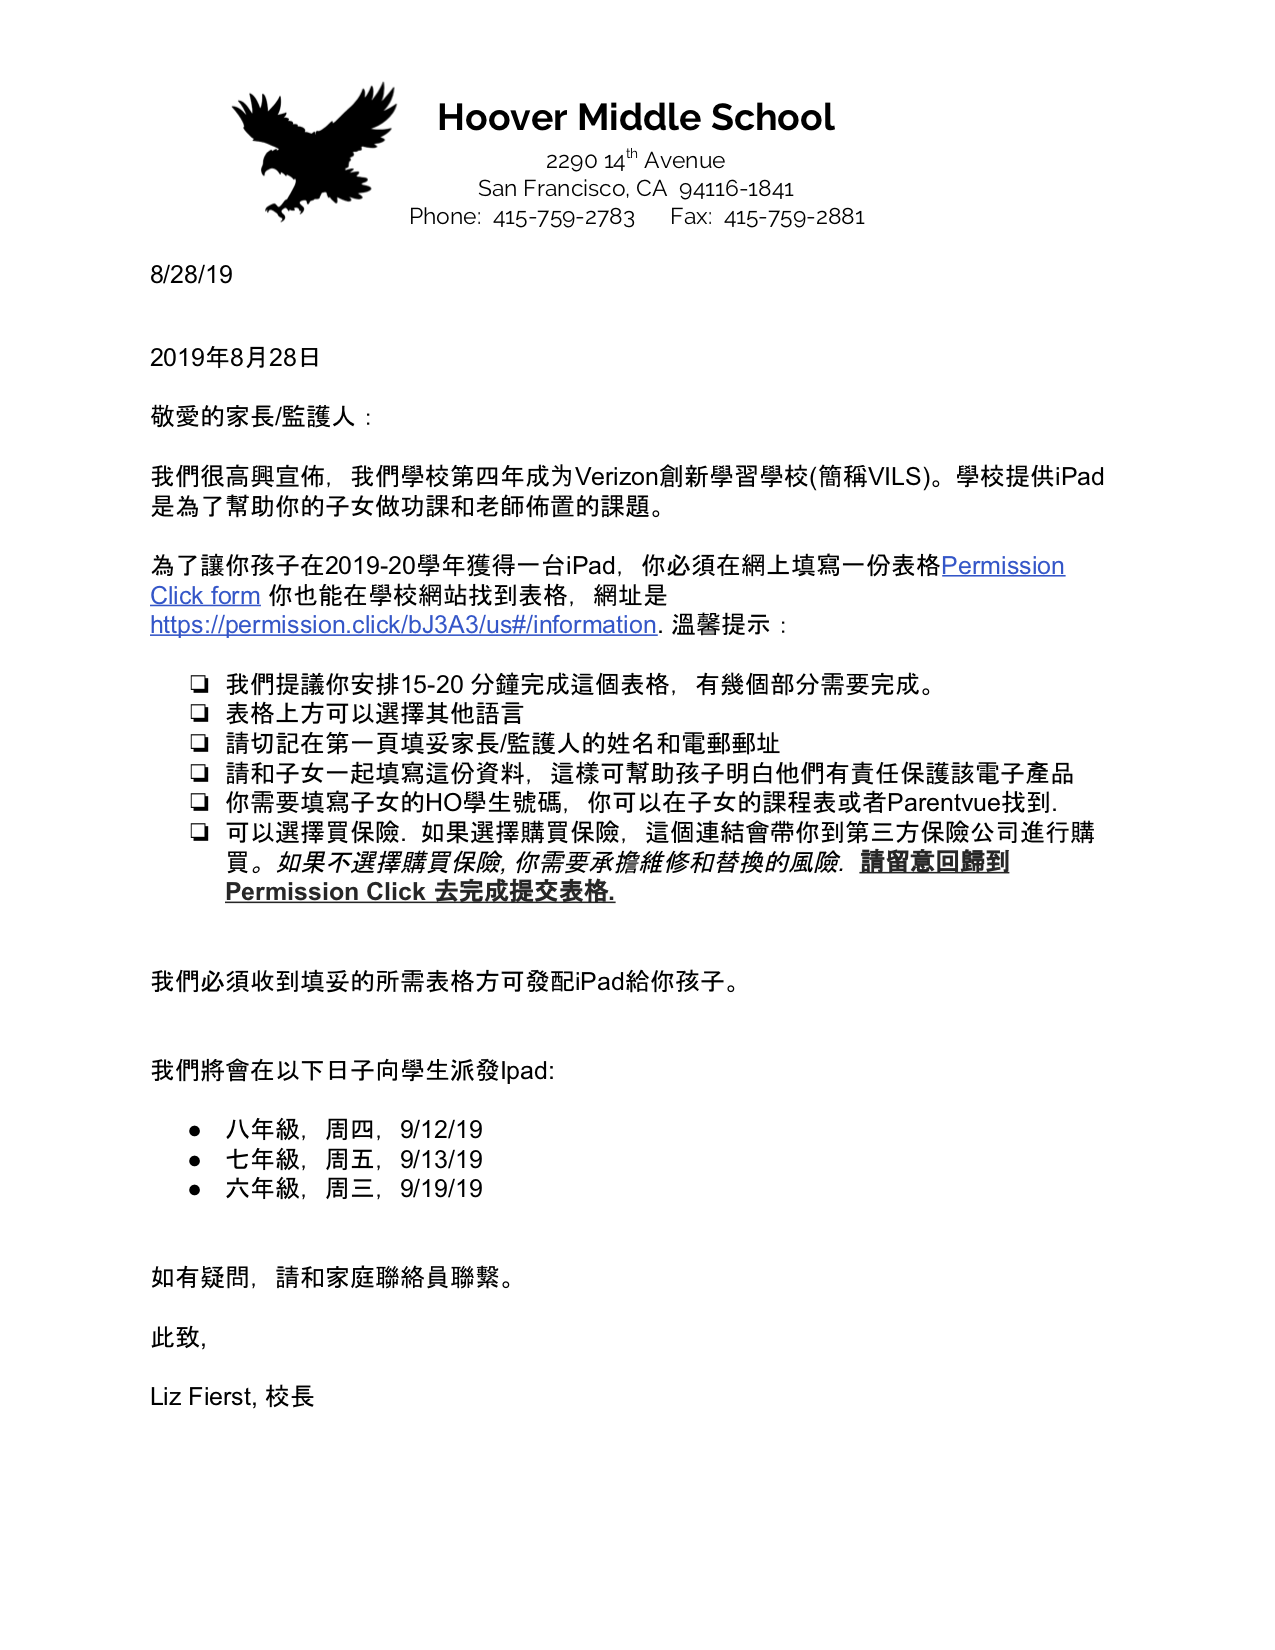 2019-20 VILS Cover Letter for Families (Chinese)